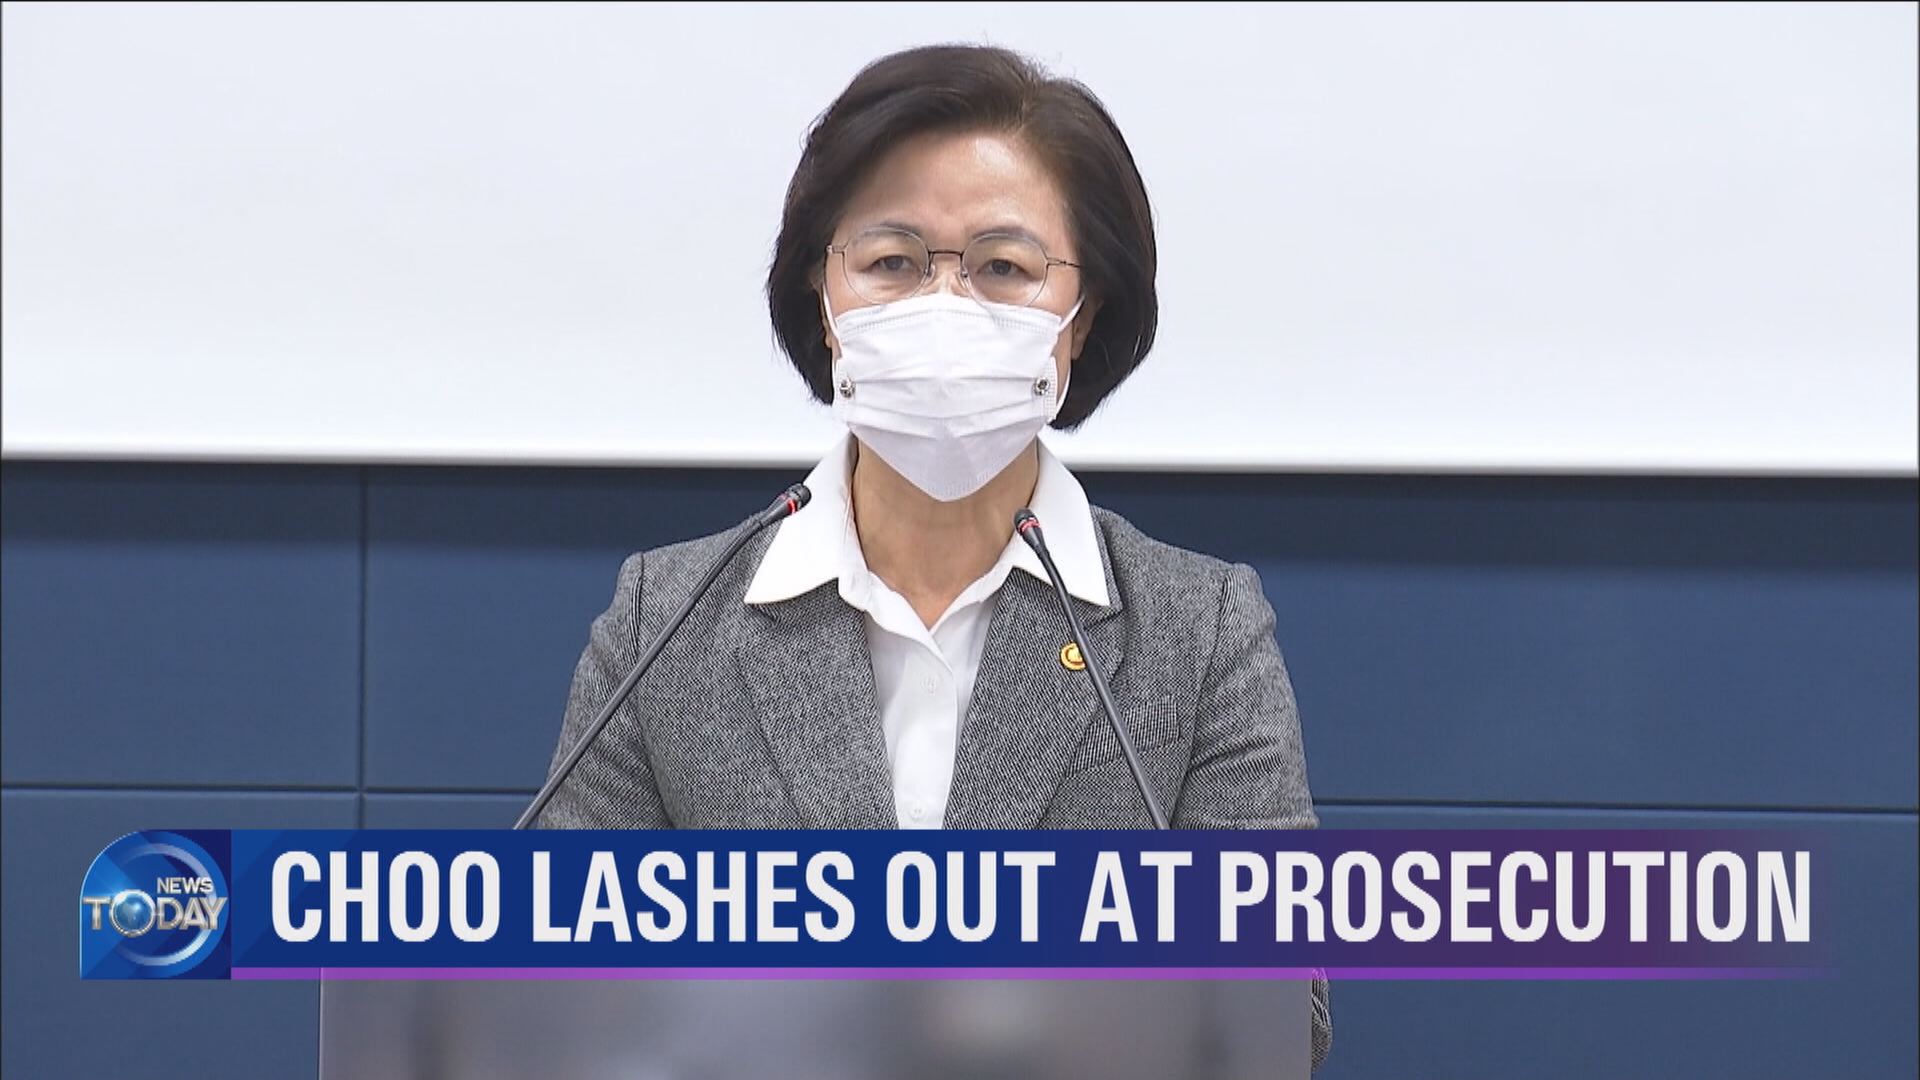 CHOO LASHES OUT AT PROSECUTION